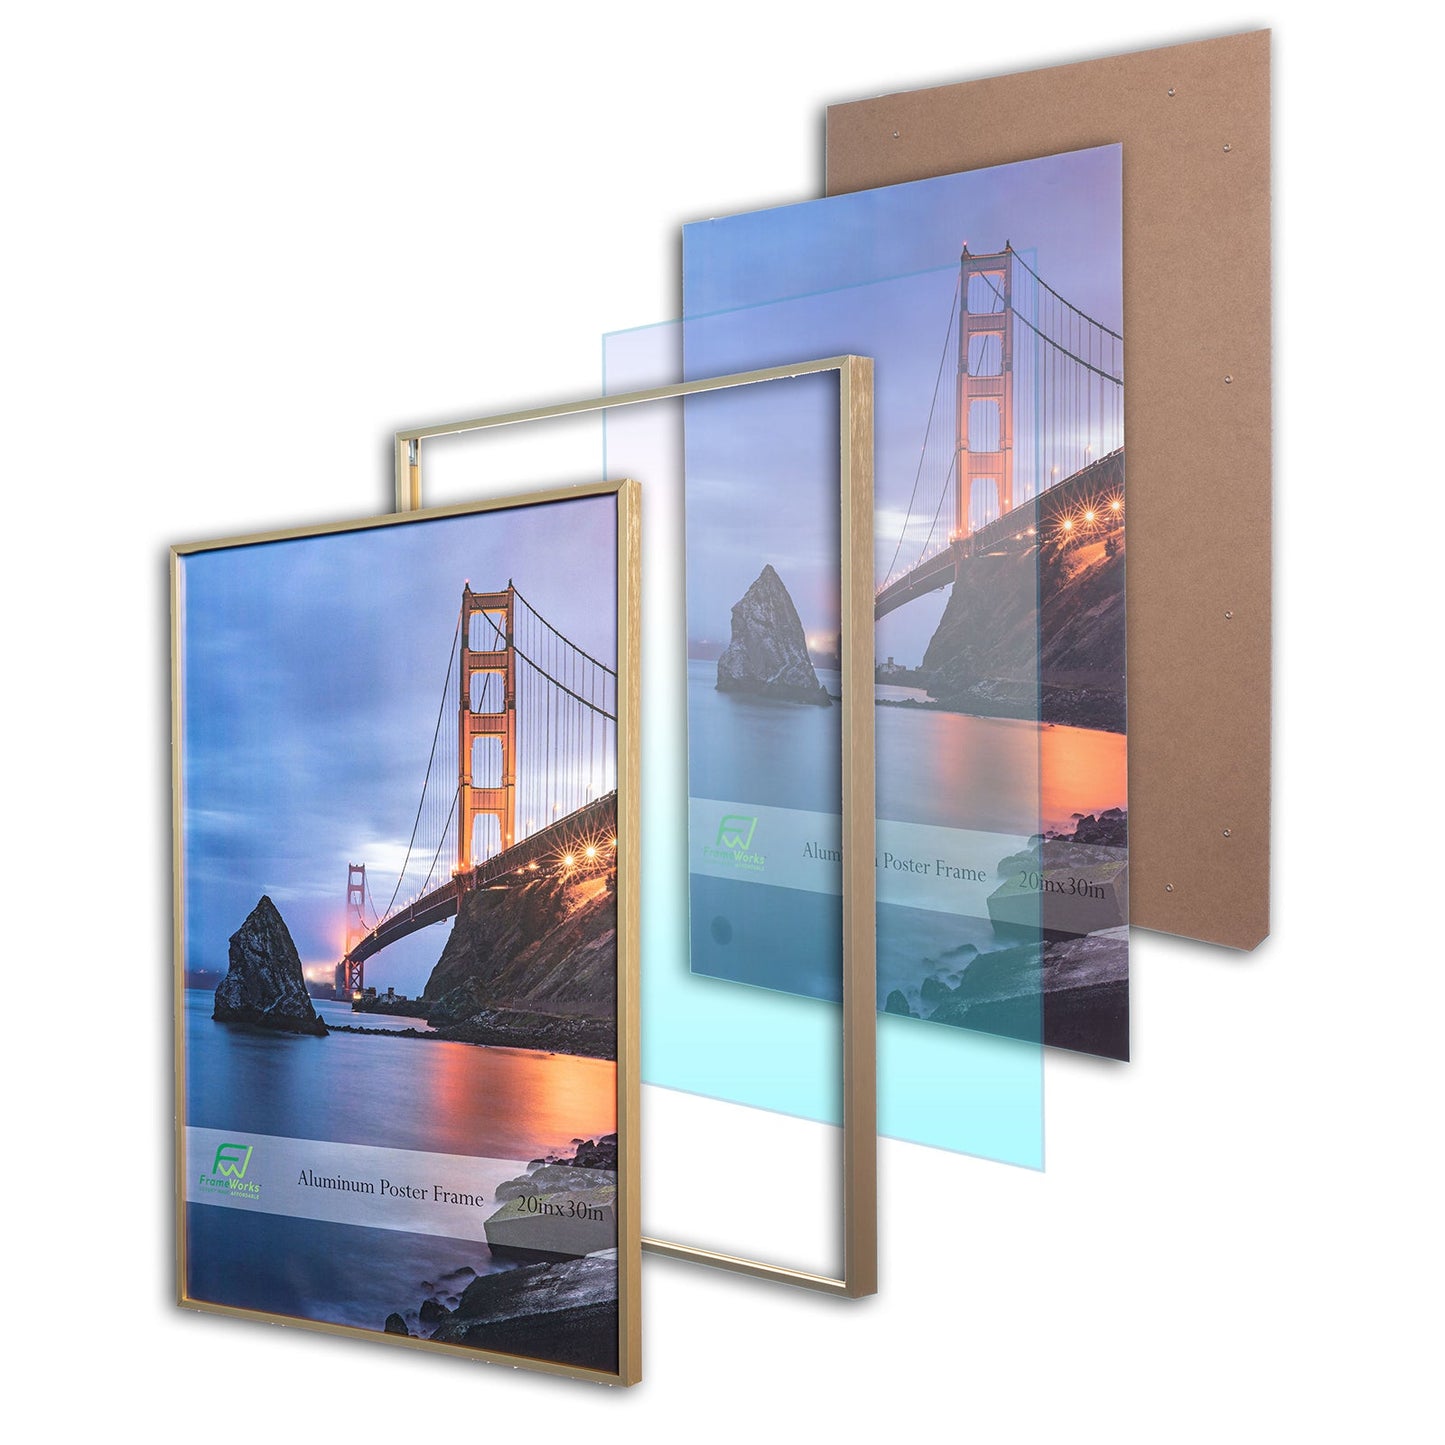 20" x 30" Gold Brushed Aluminum Poster Picture Frame with Plexiglass